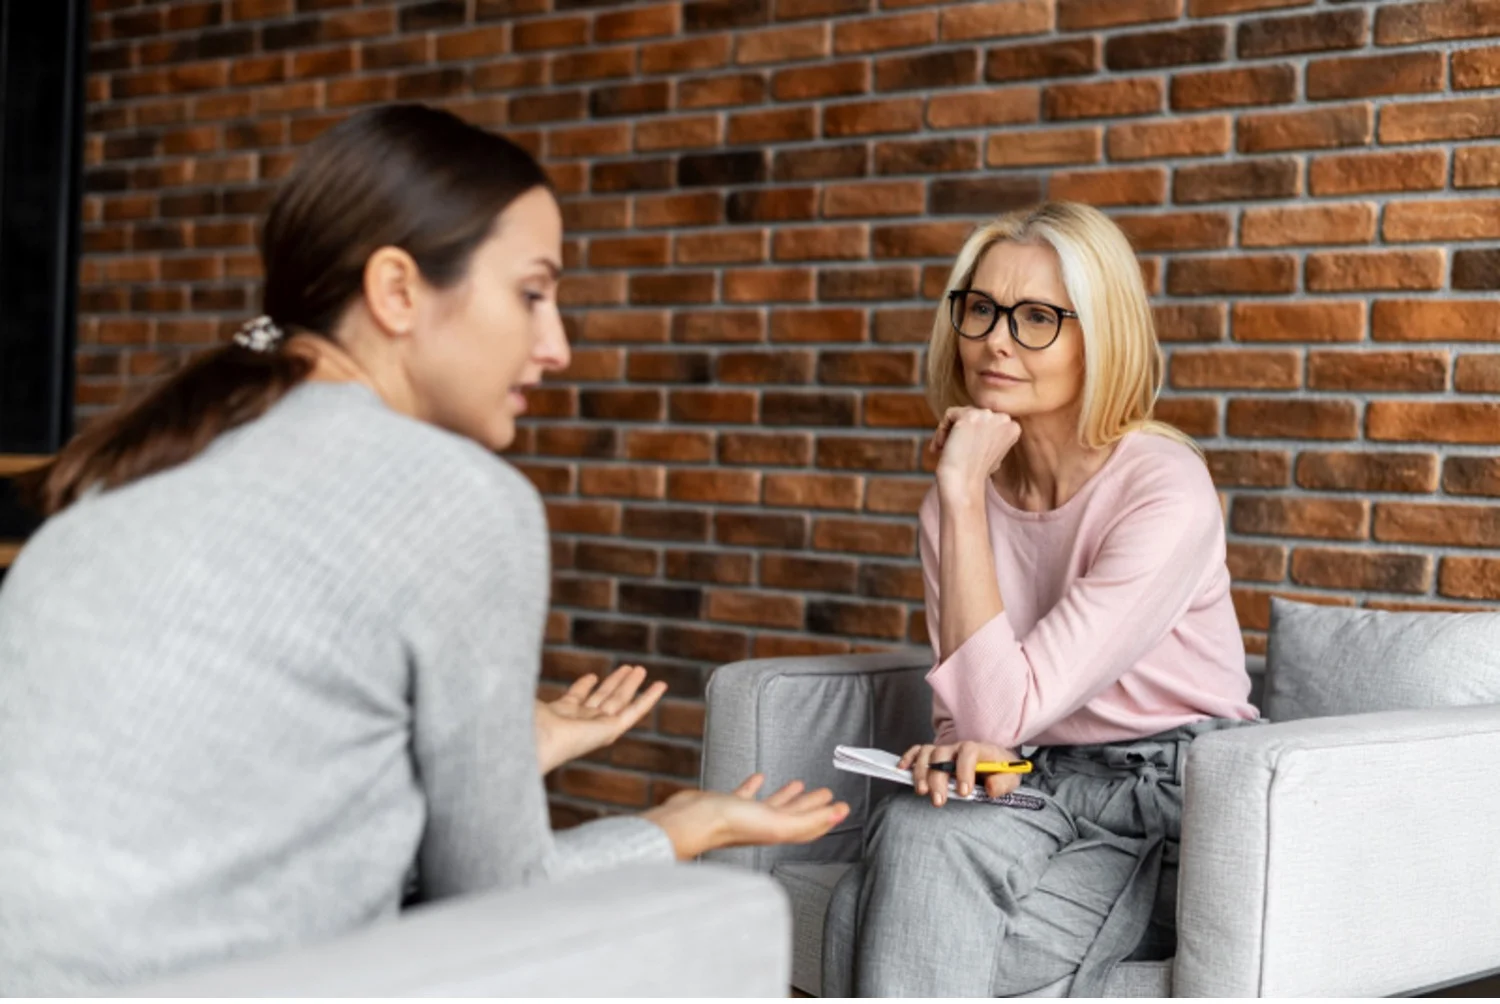 Therapist listens to young woman during treatment session